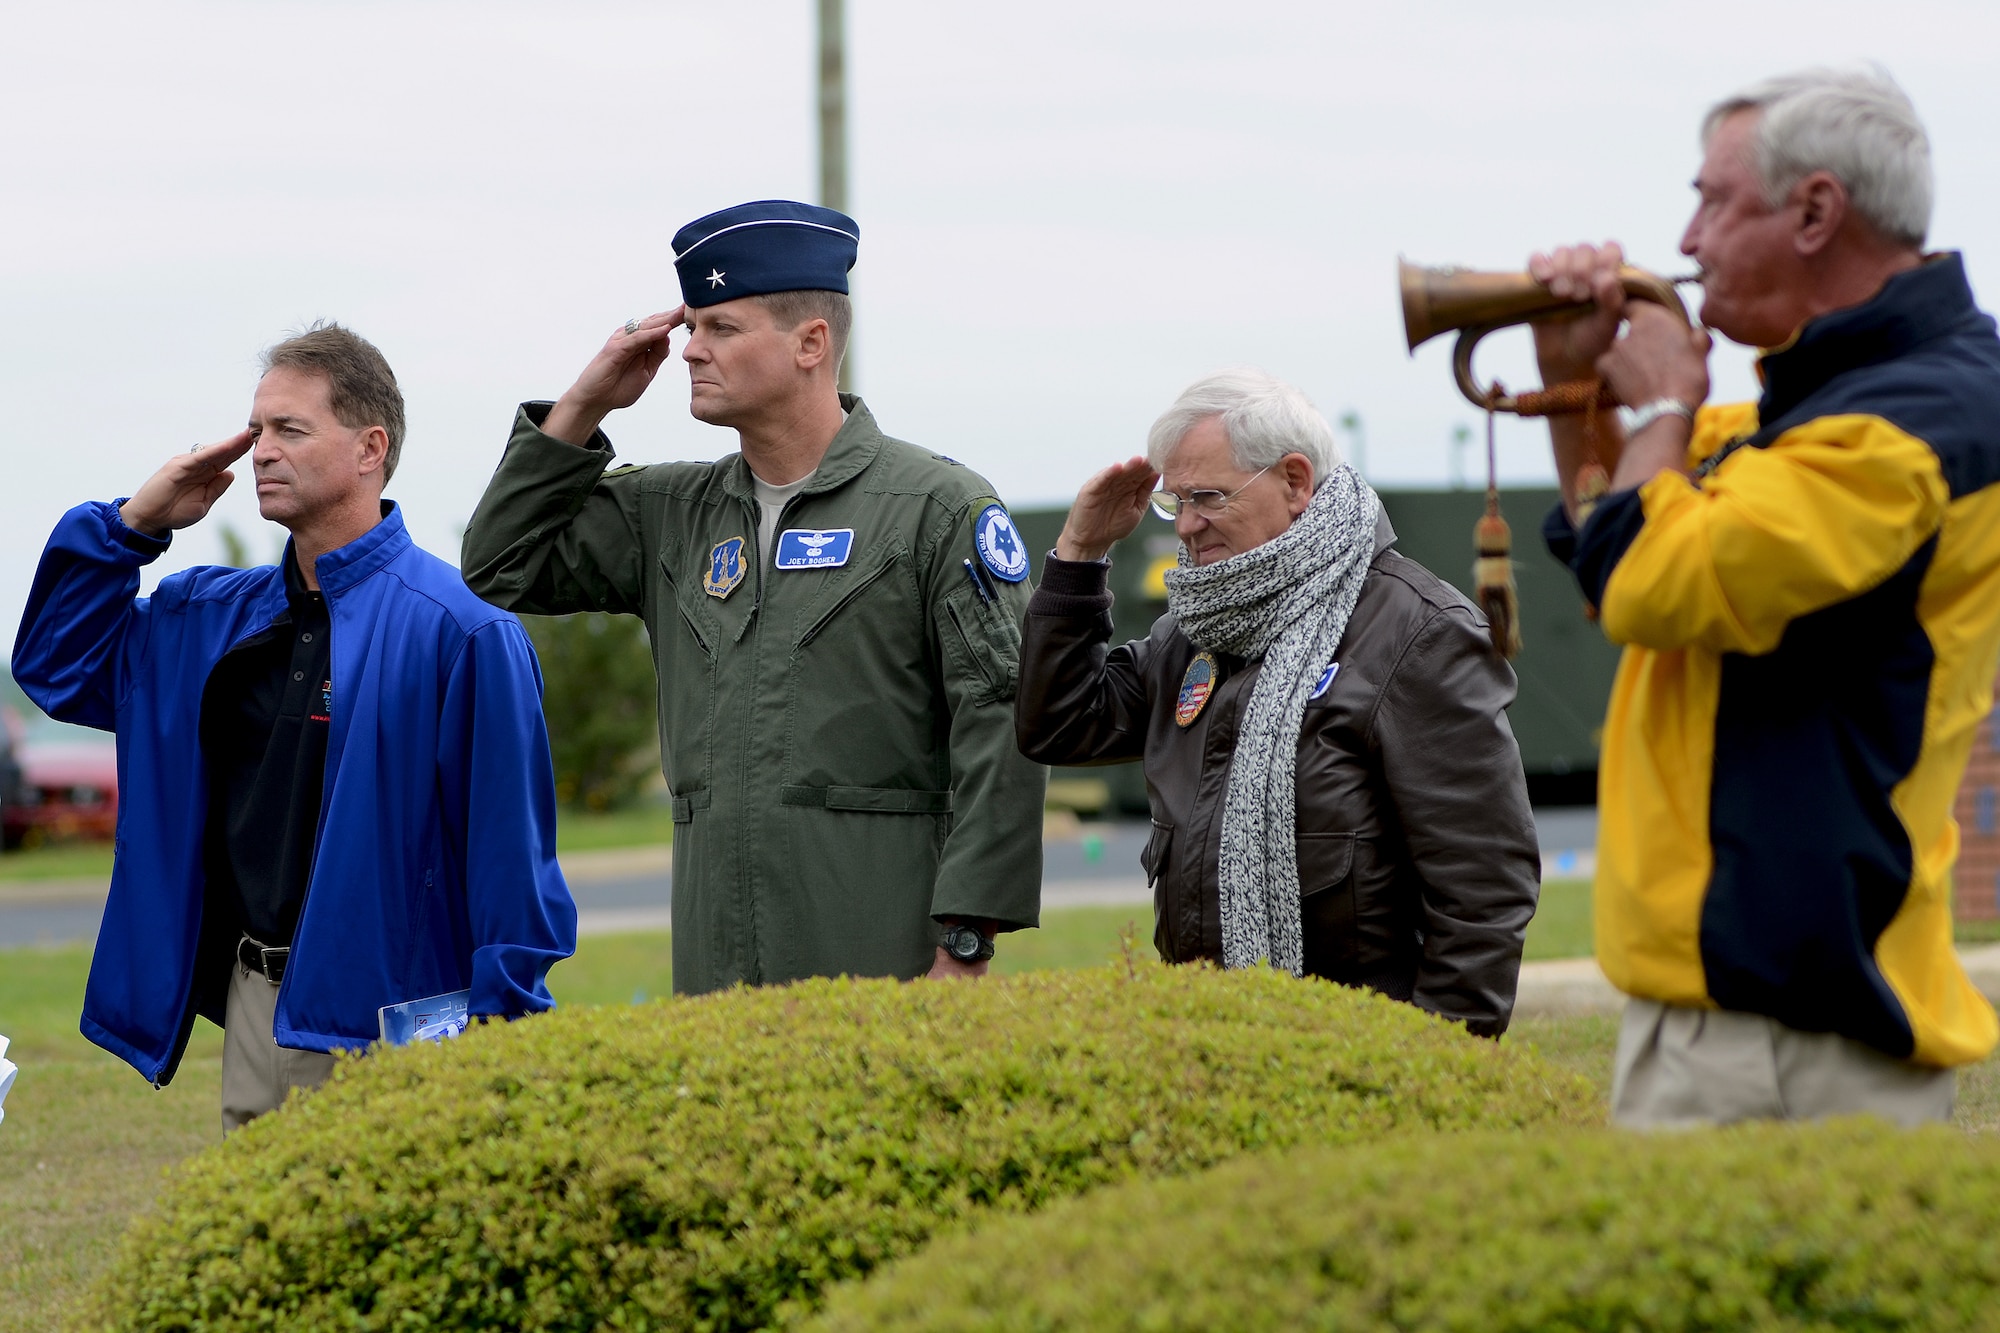 U.S. Air Force retired fighter pilots from the South Carolina Air National Guard, salute the U.S. flag as taps is played during a pilot reunion ceremony at McEntire Joint National Guard Base, Eastover, S.C., May 4, 2013. Multi-generation SCANG pilots dating back from the P-51 propeller fighter era to present converged to honor fallen comrades and celebrate their experiences and contributions to fighter operations and the legacy of the SCANG Swamp Foxes.  (U.S. Air National Guard photo by Tech. Sgt. Caycee Watson/Released)